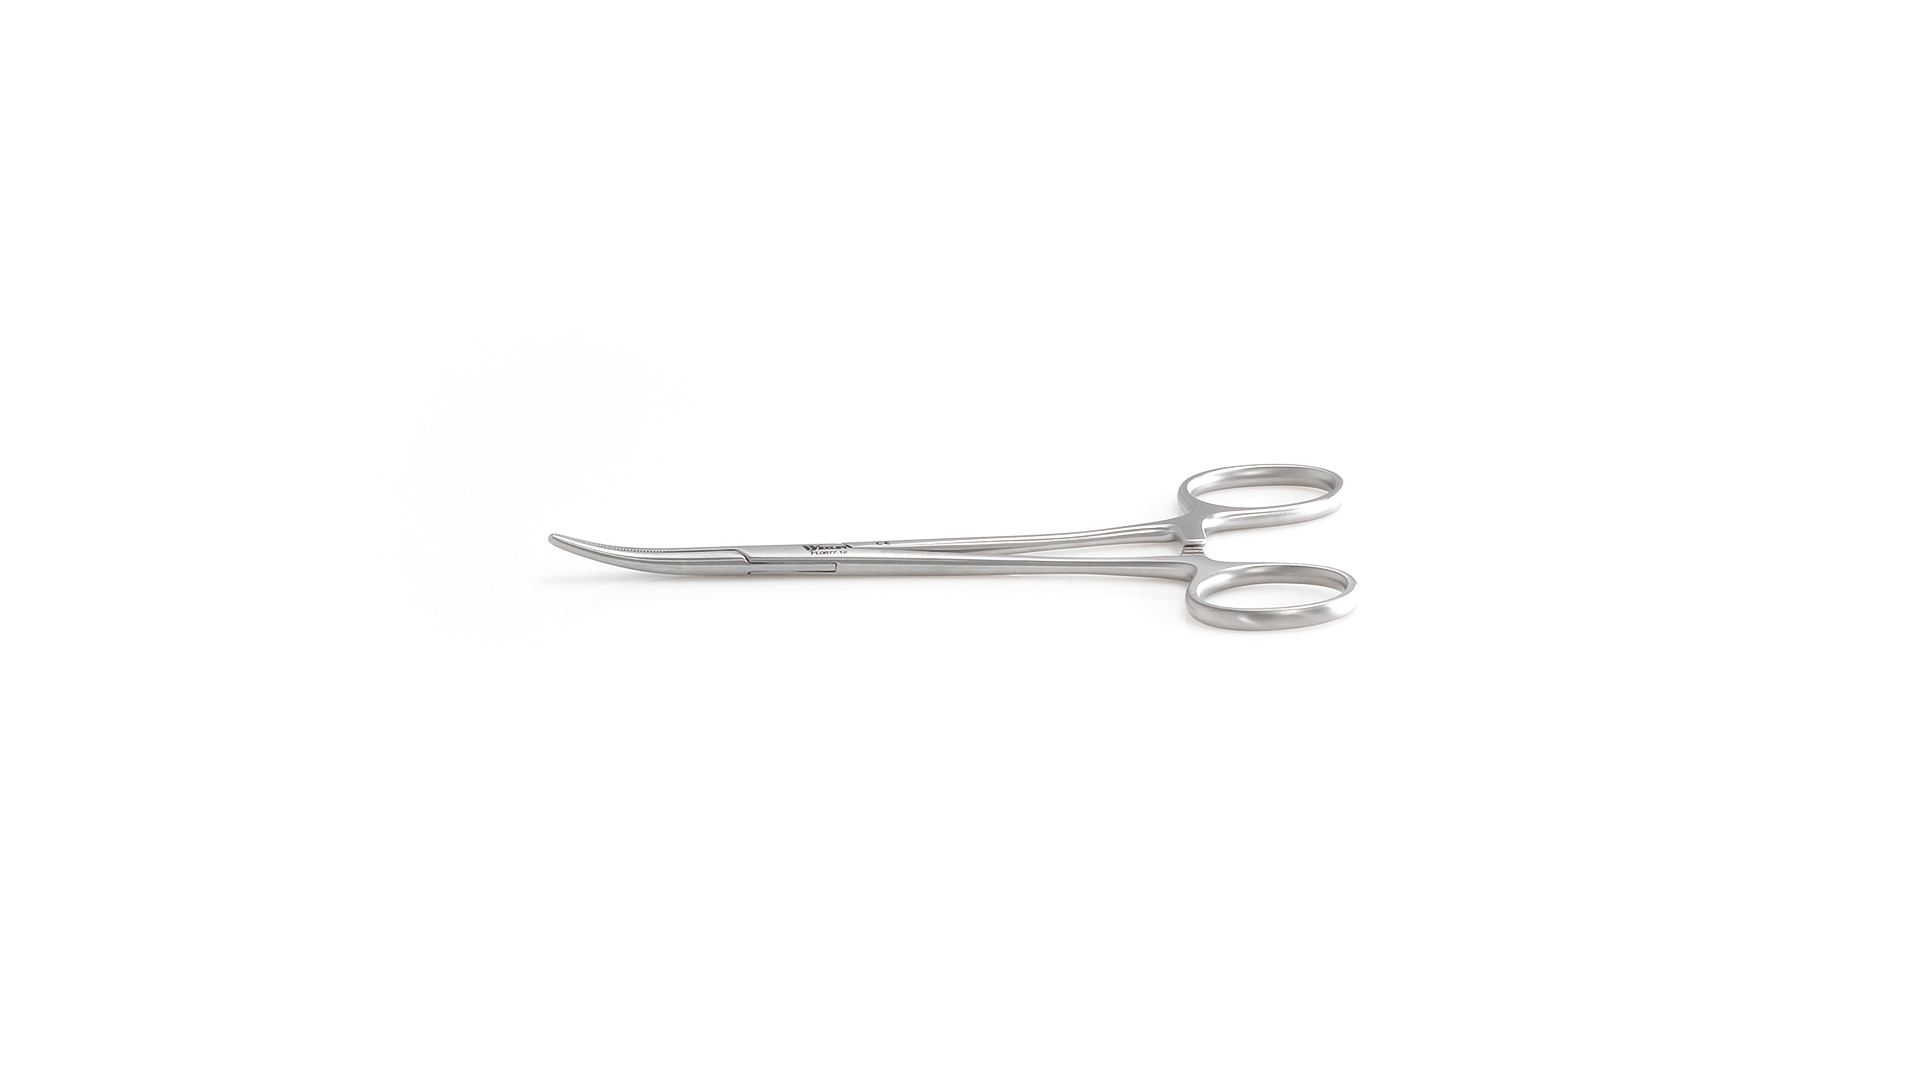 Kelly Artery Forceps - Curved serrated jaws